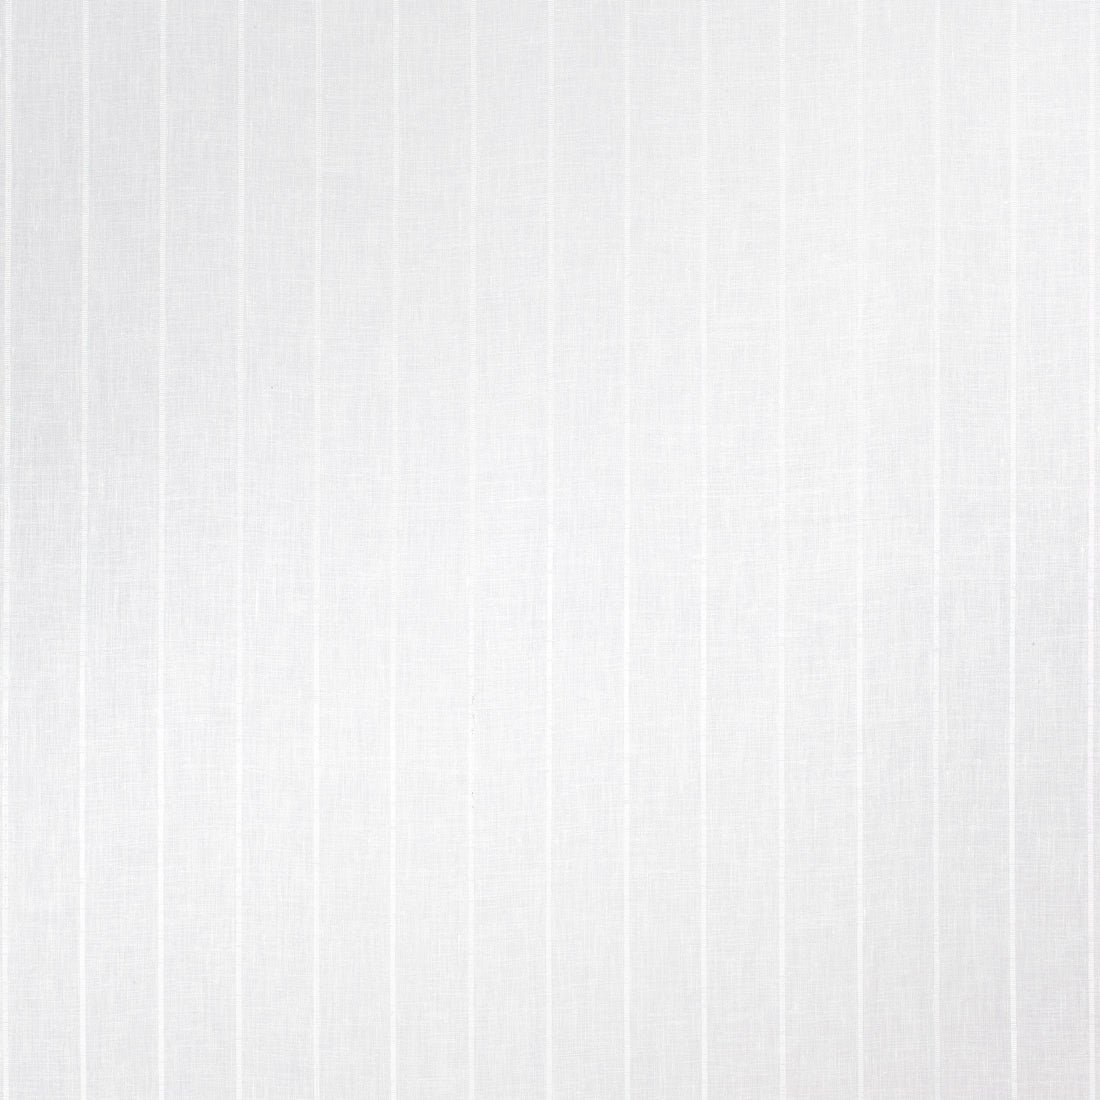 Deco Stripe fabric in white color - pattern number AW9132 - by Anna French in the Natural Glimmer collection